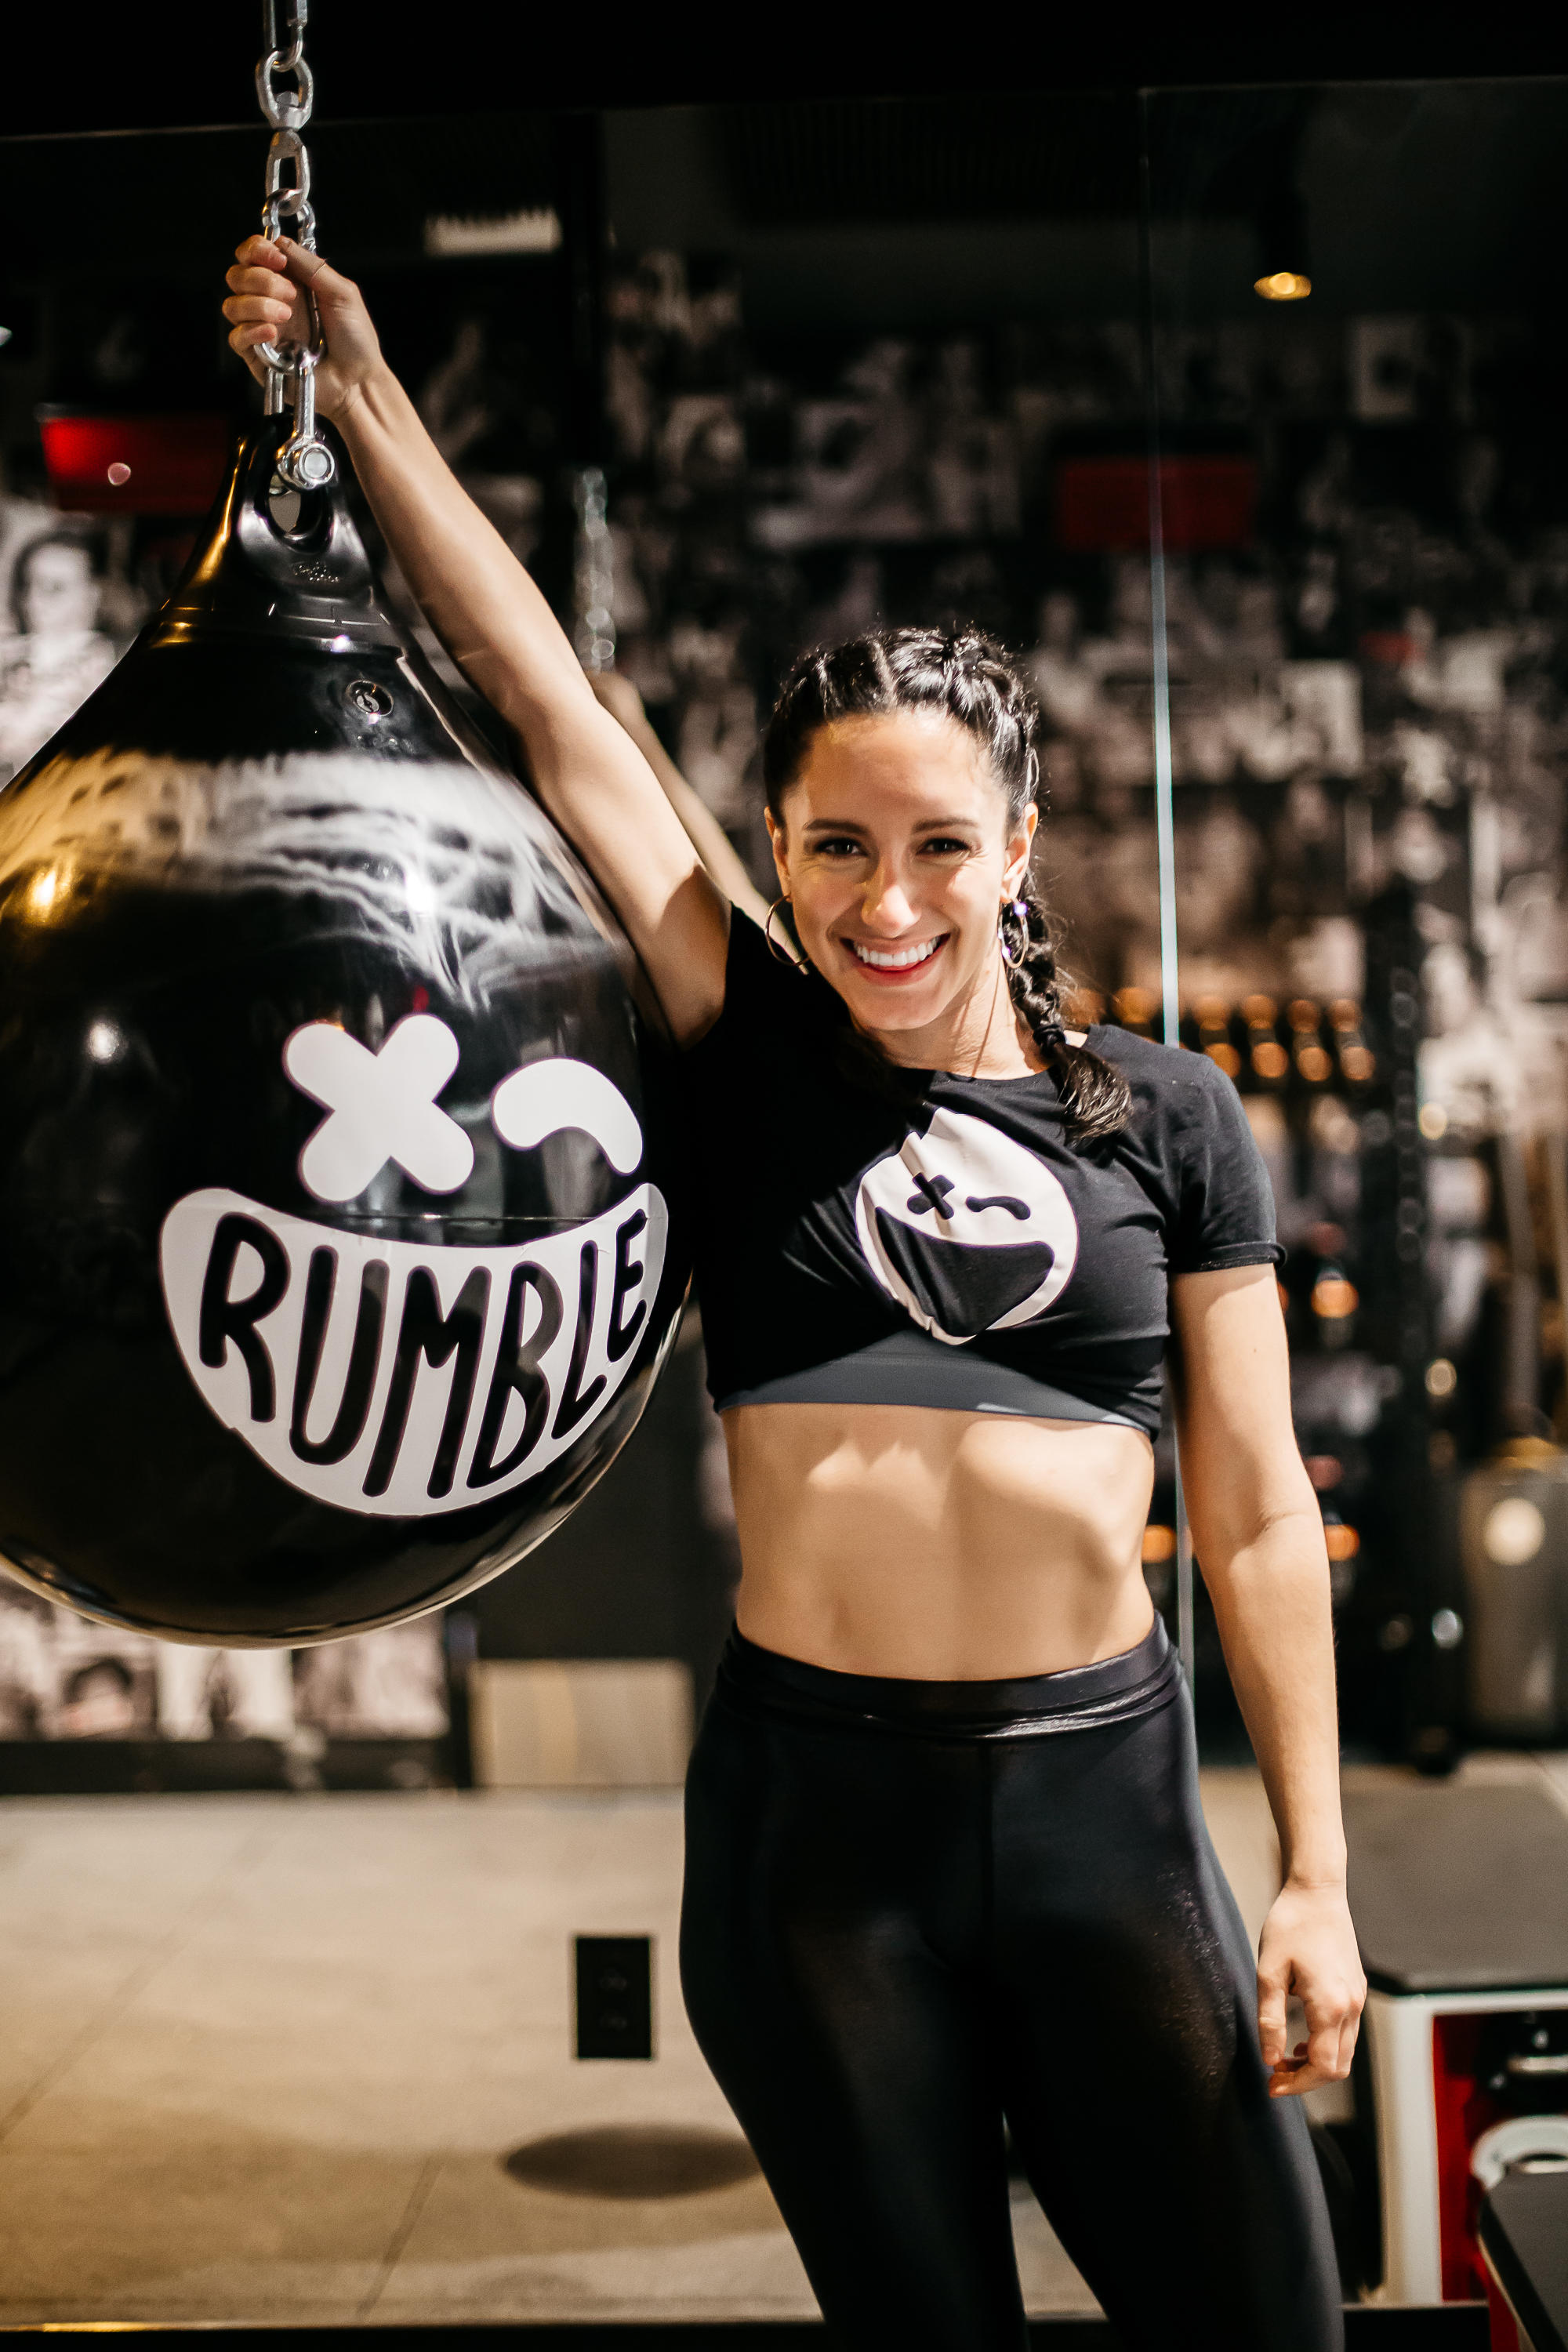 Rumble Boxing is coming soon to Montvale, NJ!